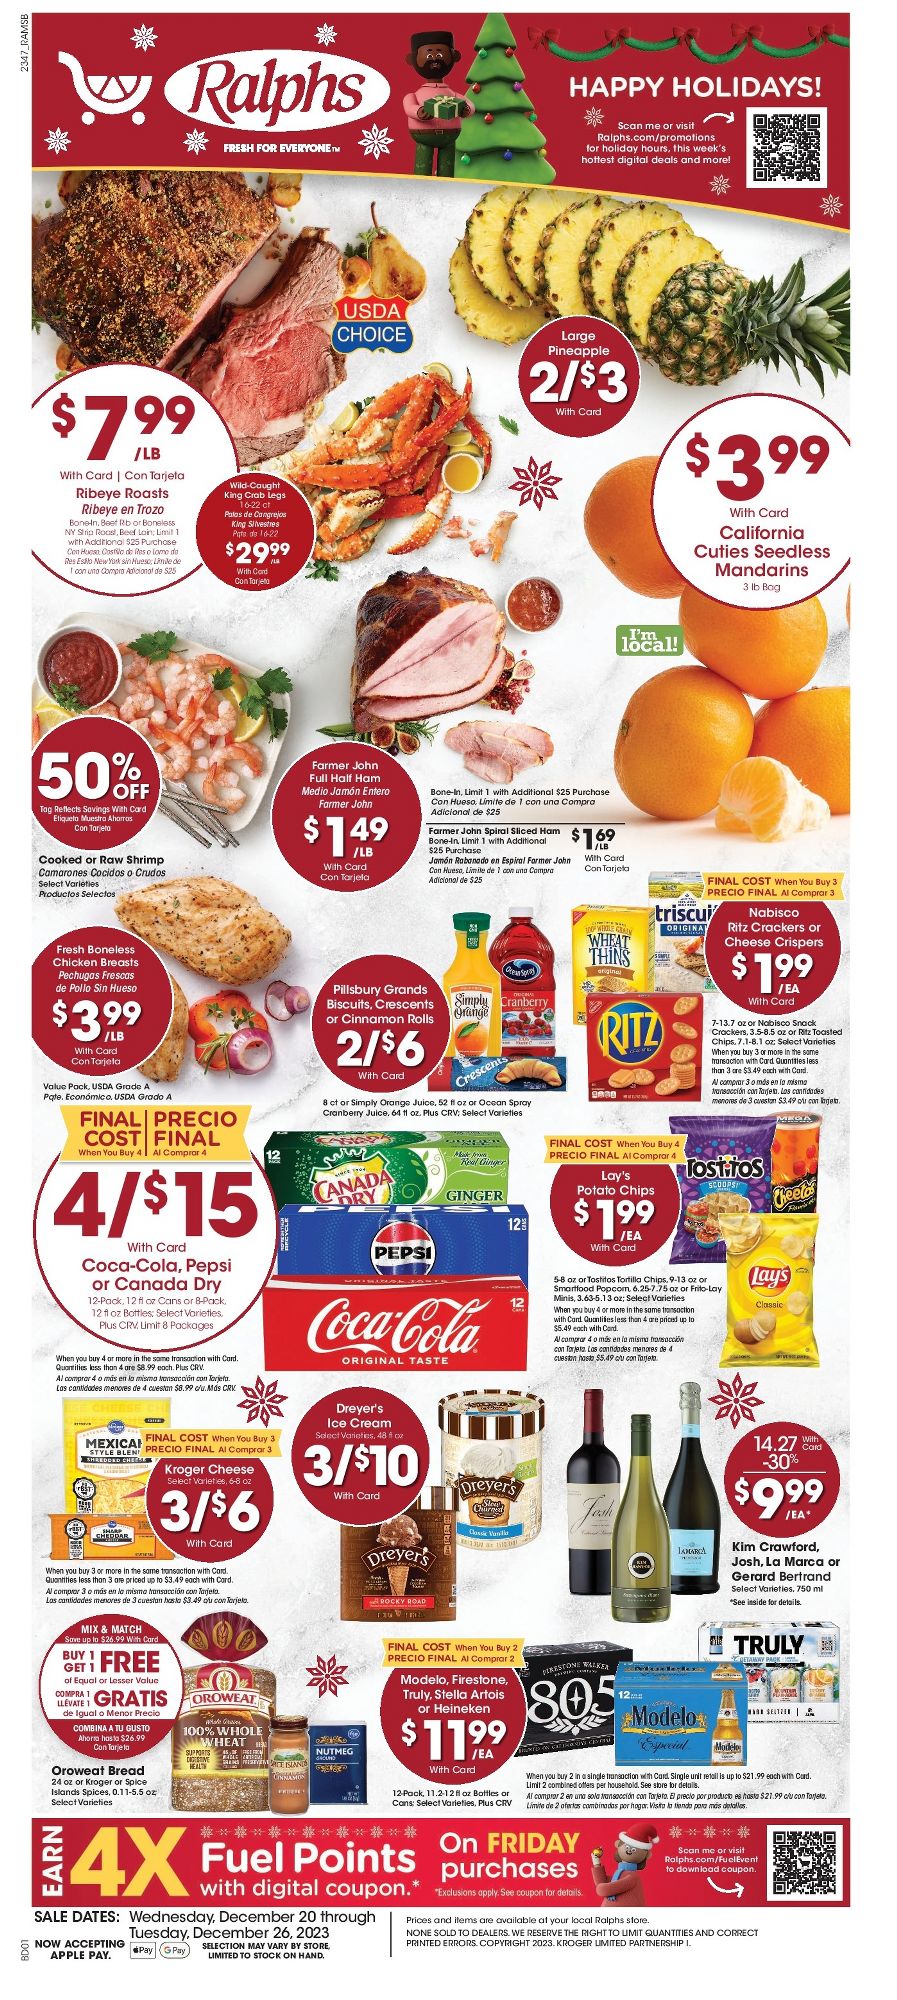 Ralphs Christmas July 2024 Weekly Sales, Deals, Discounts and Digital Coupons.